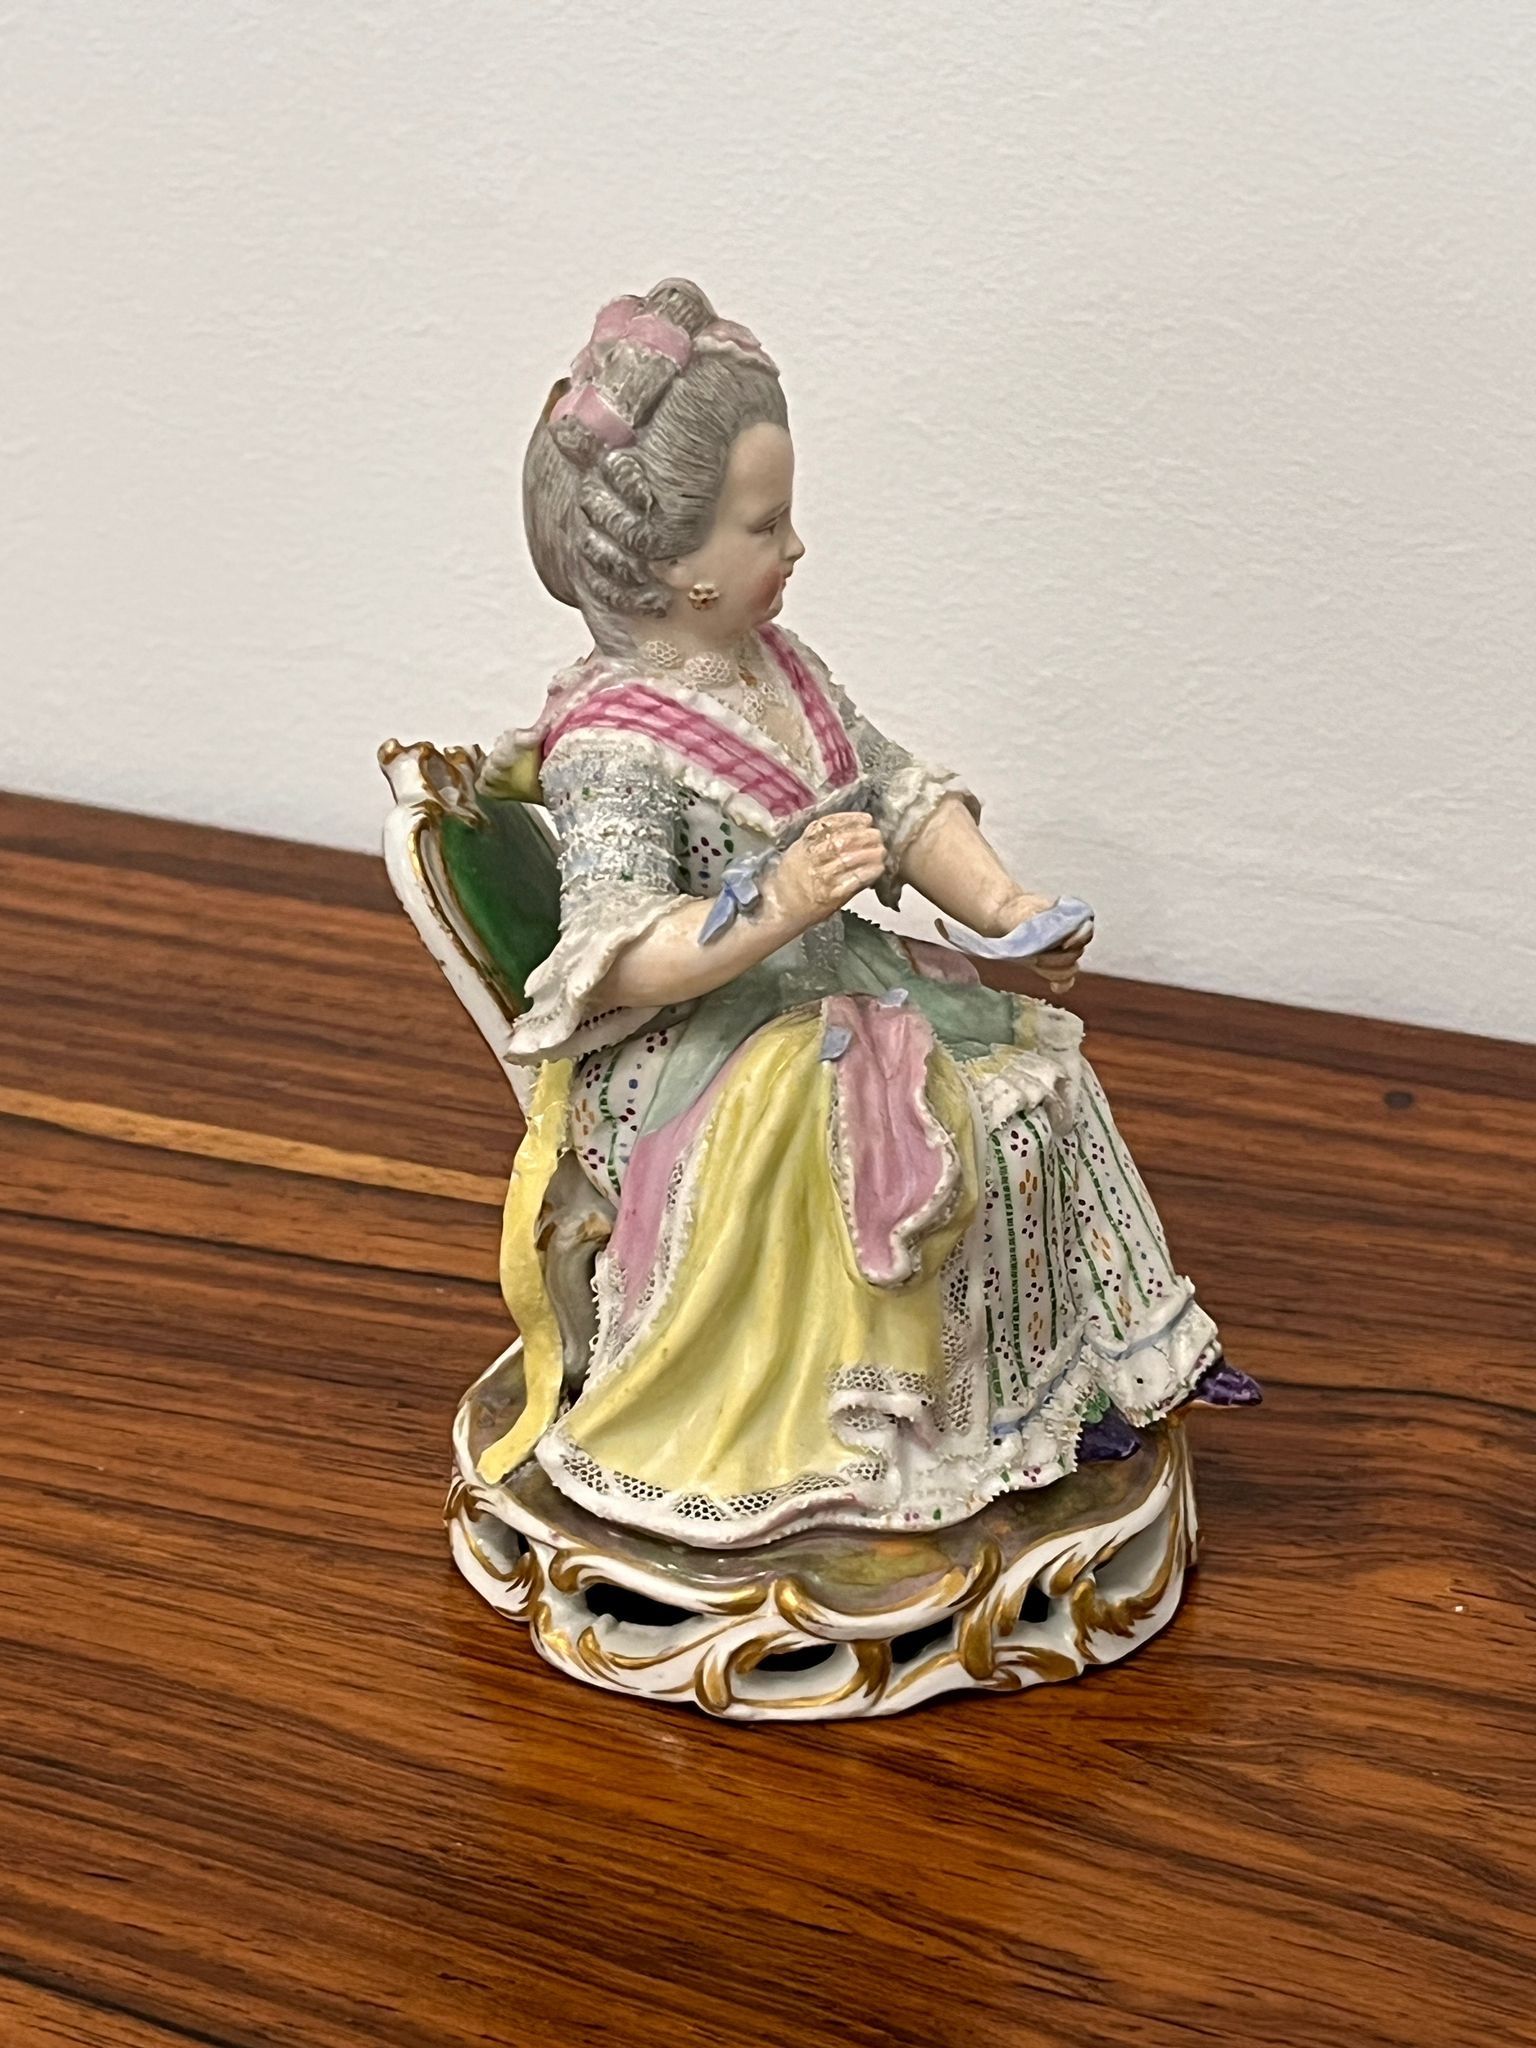 Antique Meissen figure of a lady sitting on a chair 19th century height approx 13cm - Image 3 of 4